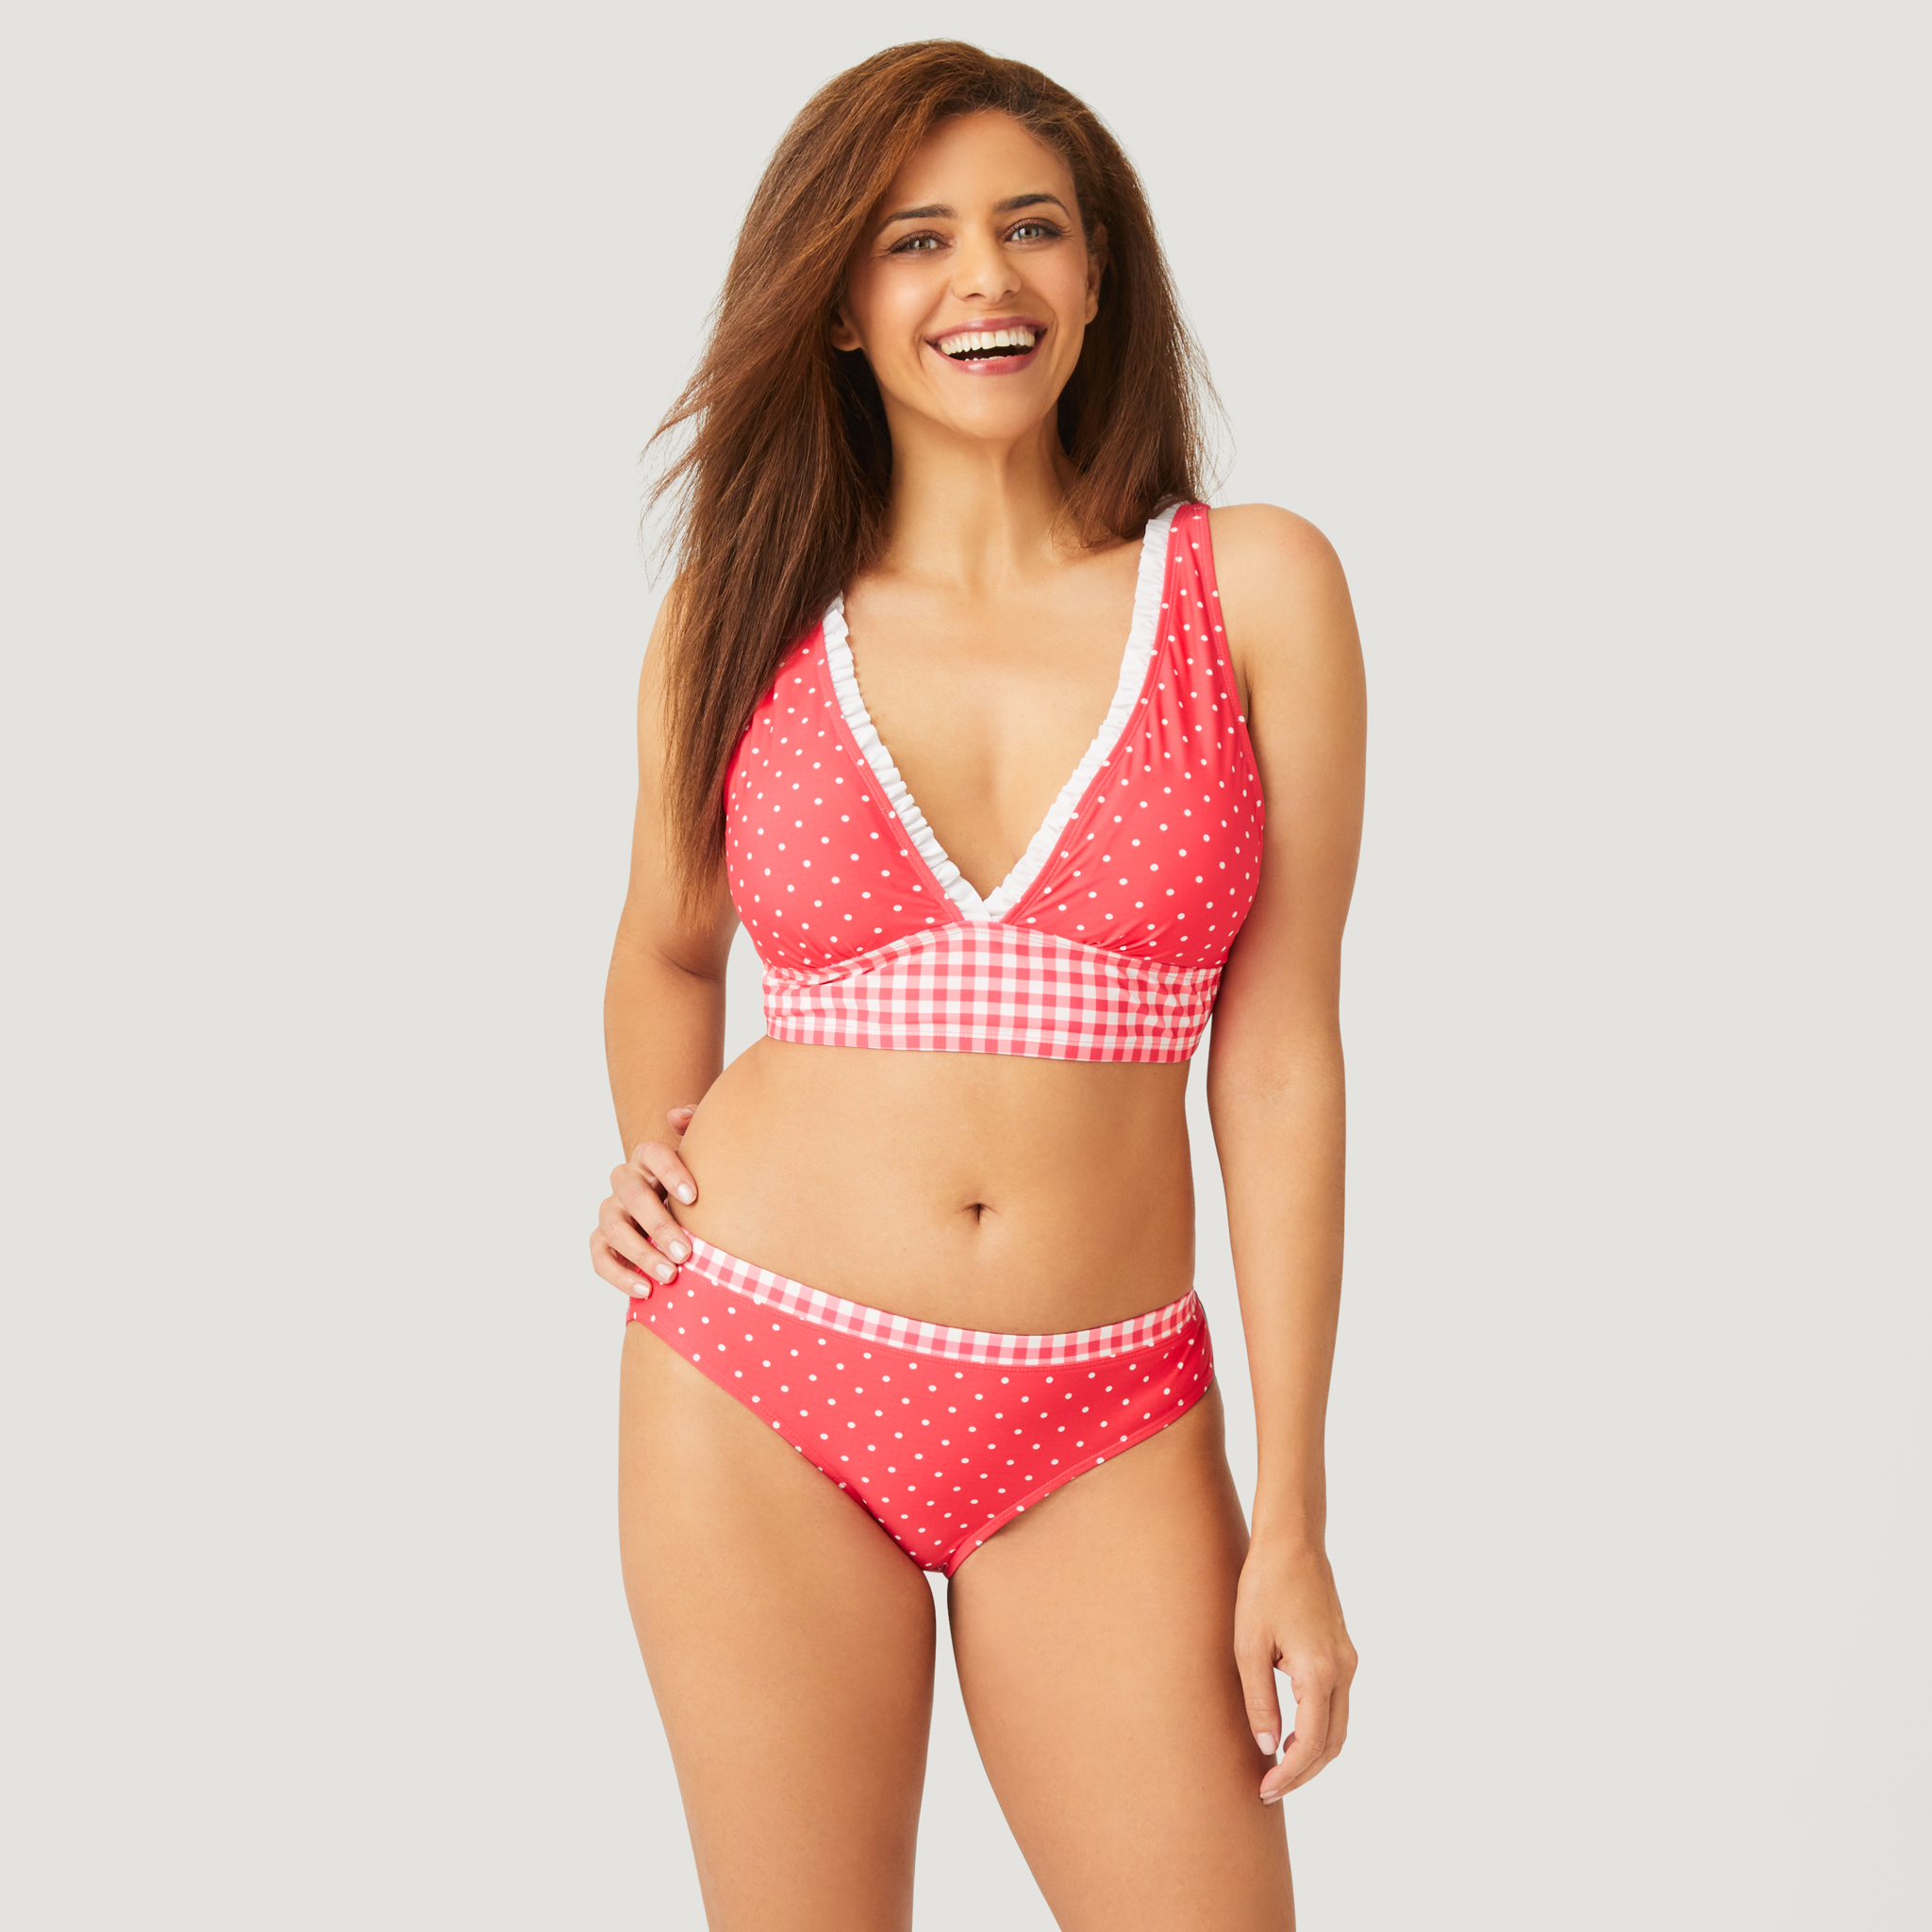 Free Country Women's Shoreline Collection Swimwear (Various styles) $33 + Free Shipping